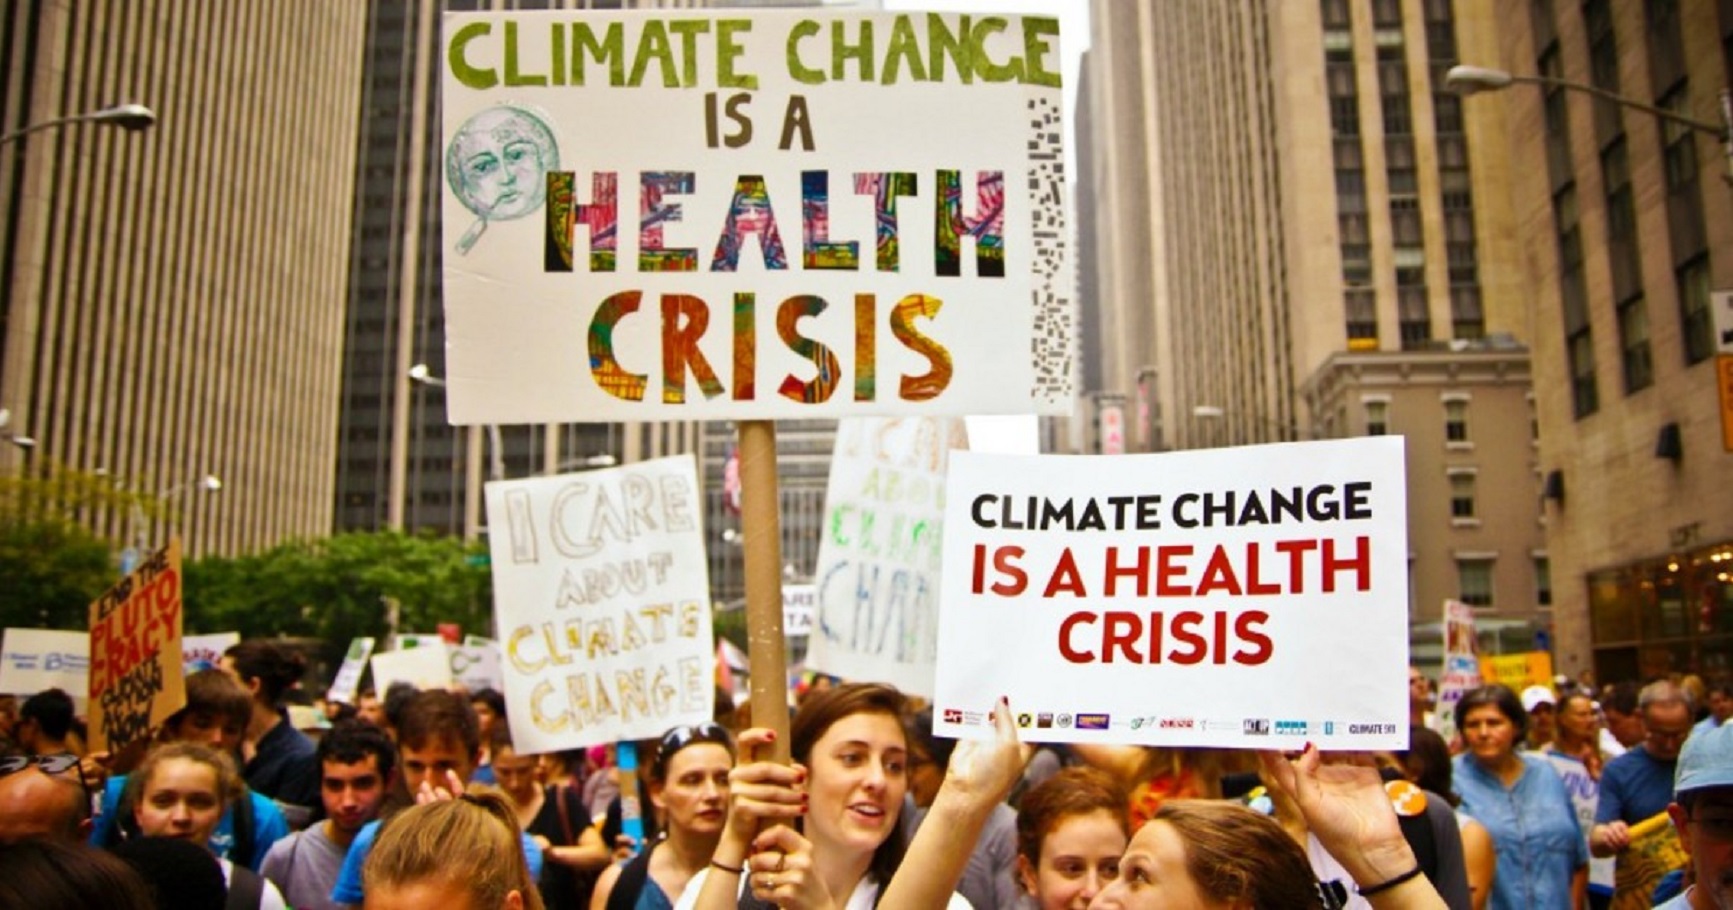 Why are the globalists calling “Climate Change” a “Public Health Crisis”?